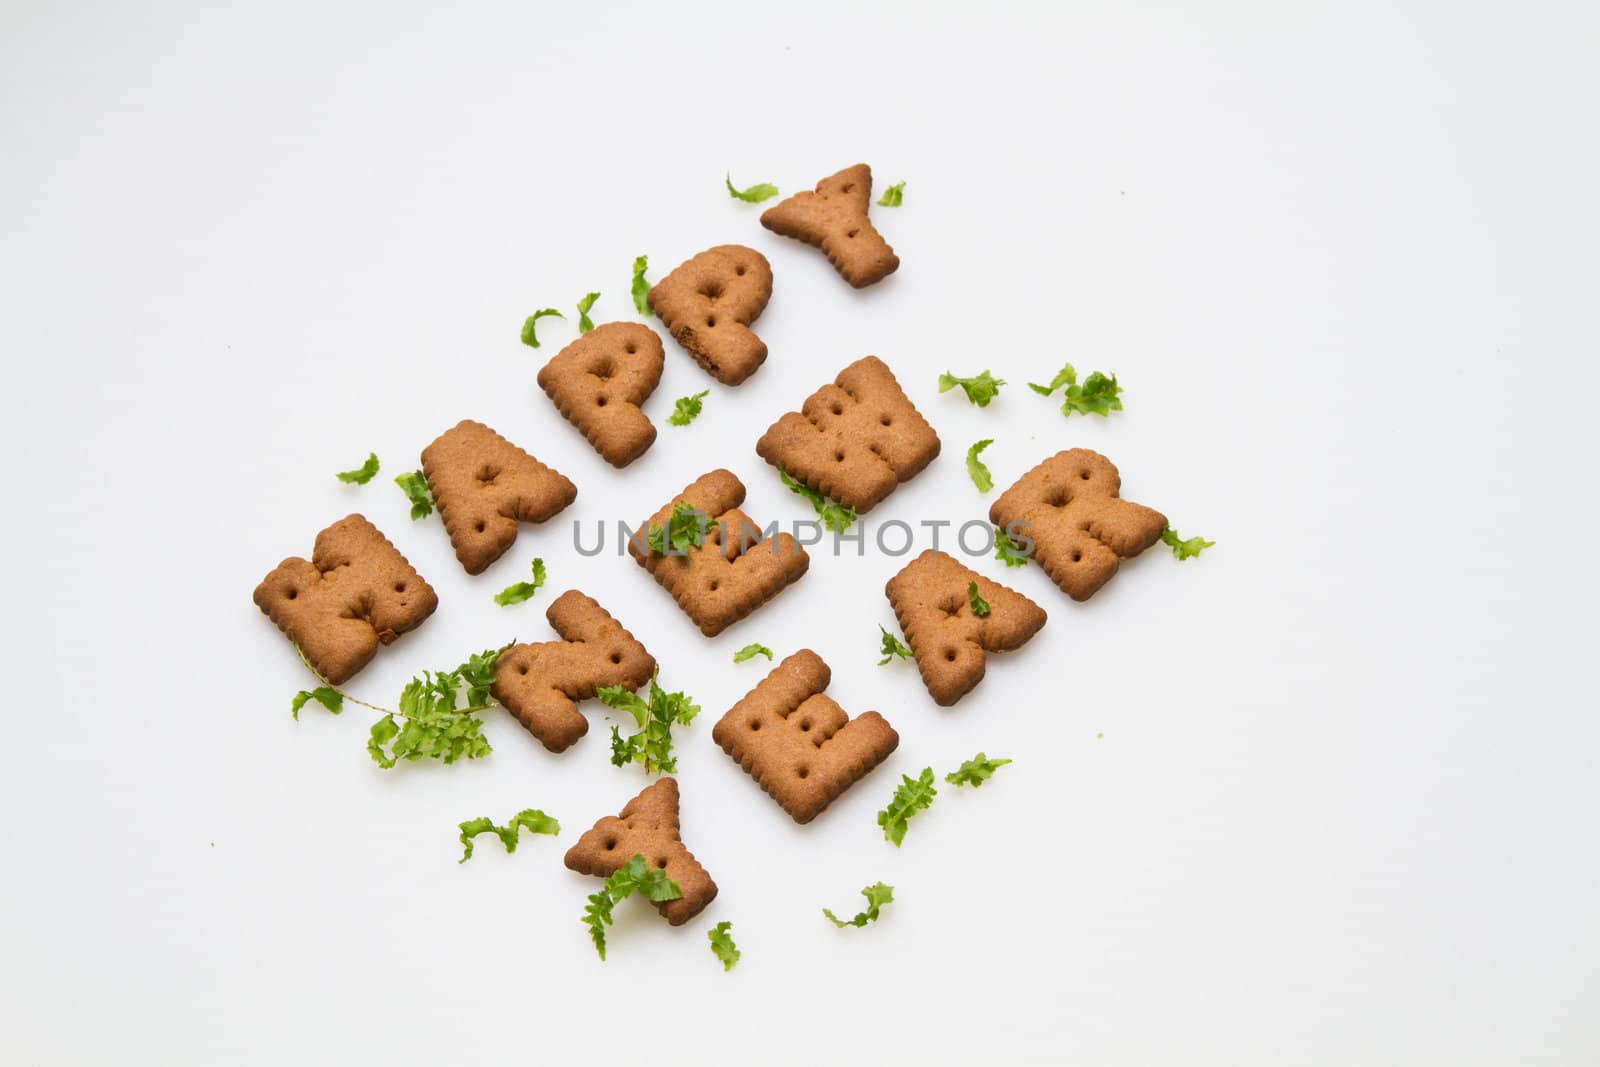 Angled view of Happy New Year greeting words made by brown biscuits with green leaves on white surface in landscape orientation for background use